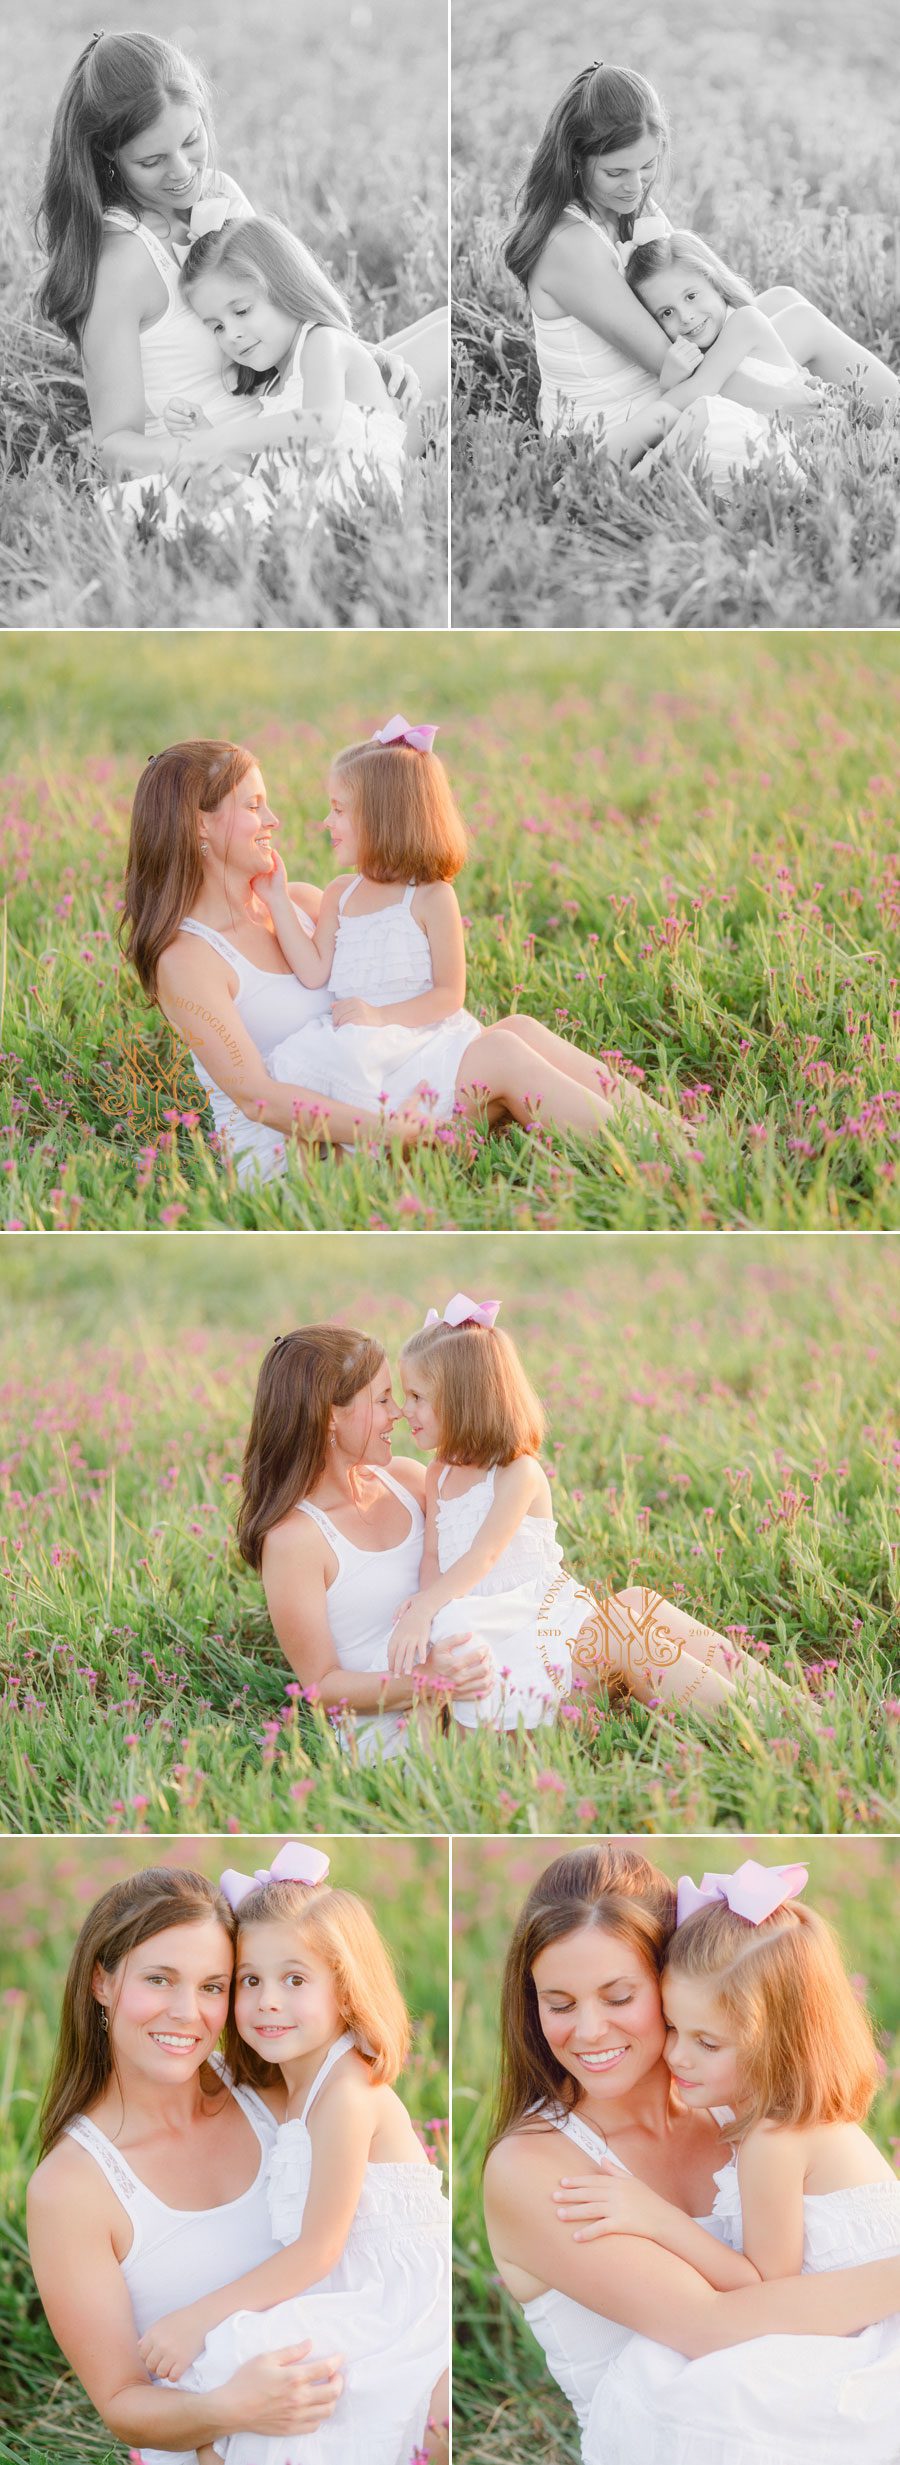 Motherhood photography of mother and daughter in a field in the Athens, GA area.